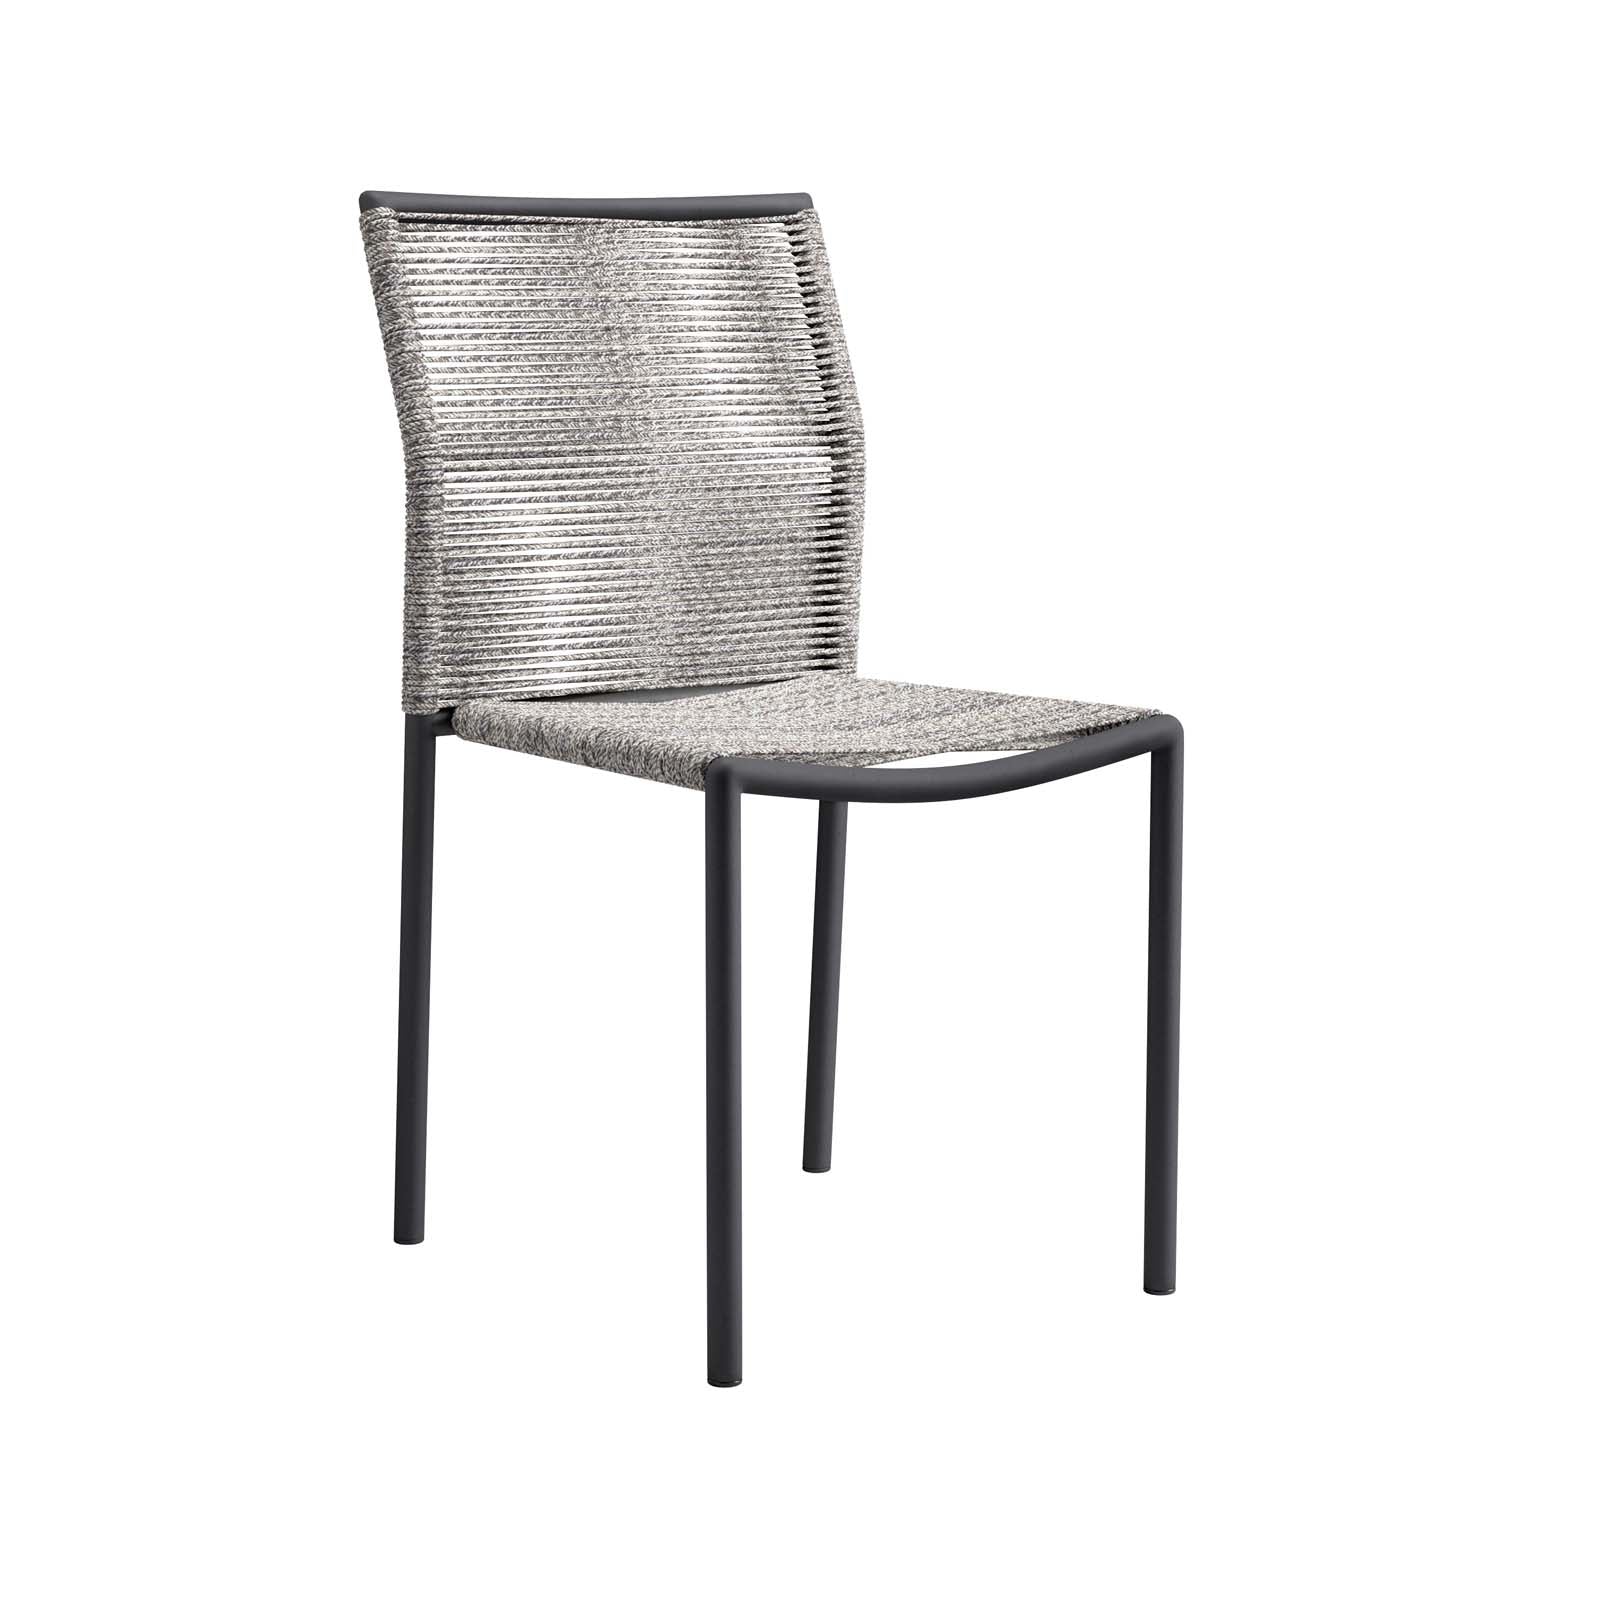 Serenity Outdoor Patio Chairs Set of 2 - East Shore Modern Home Furnishings